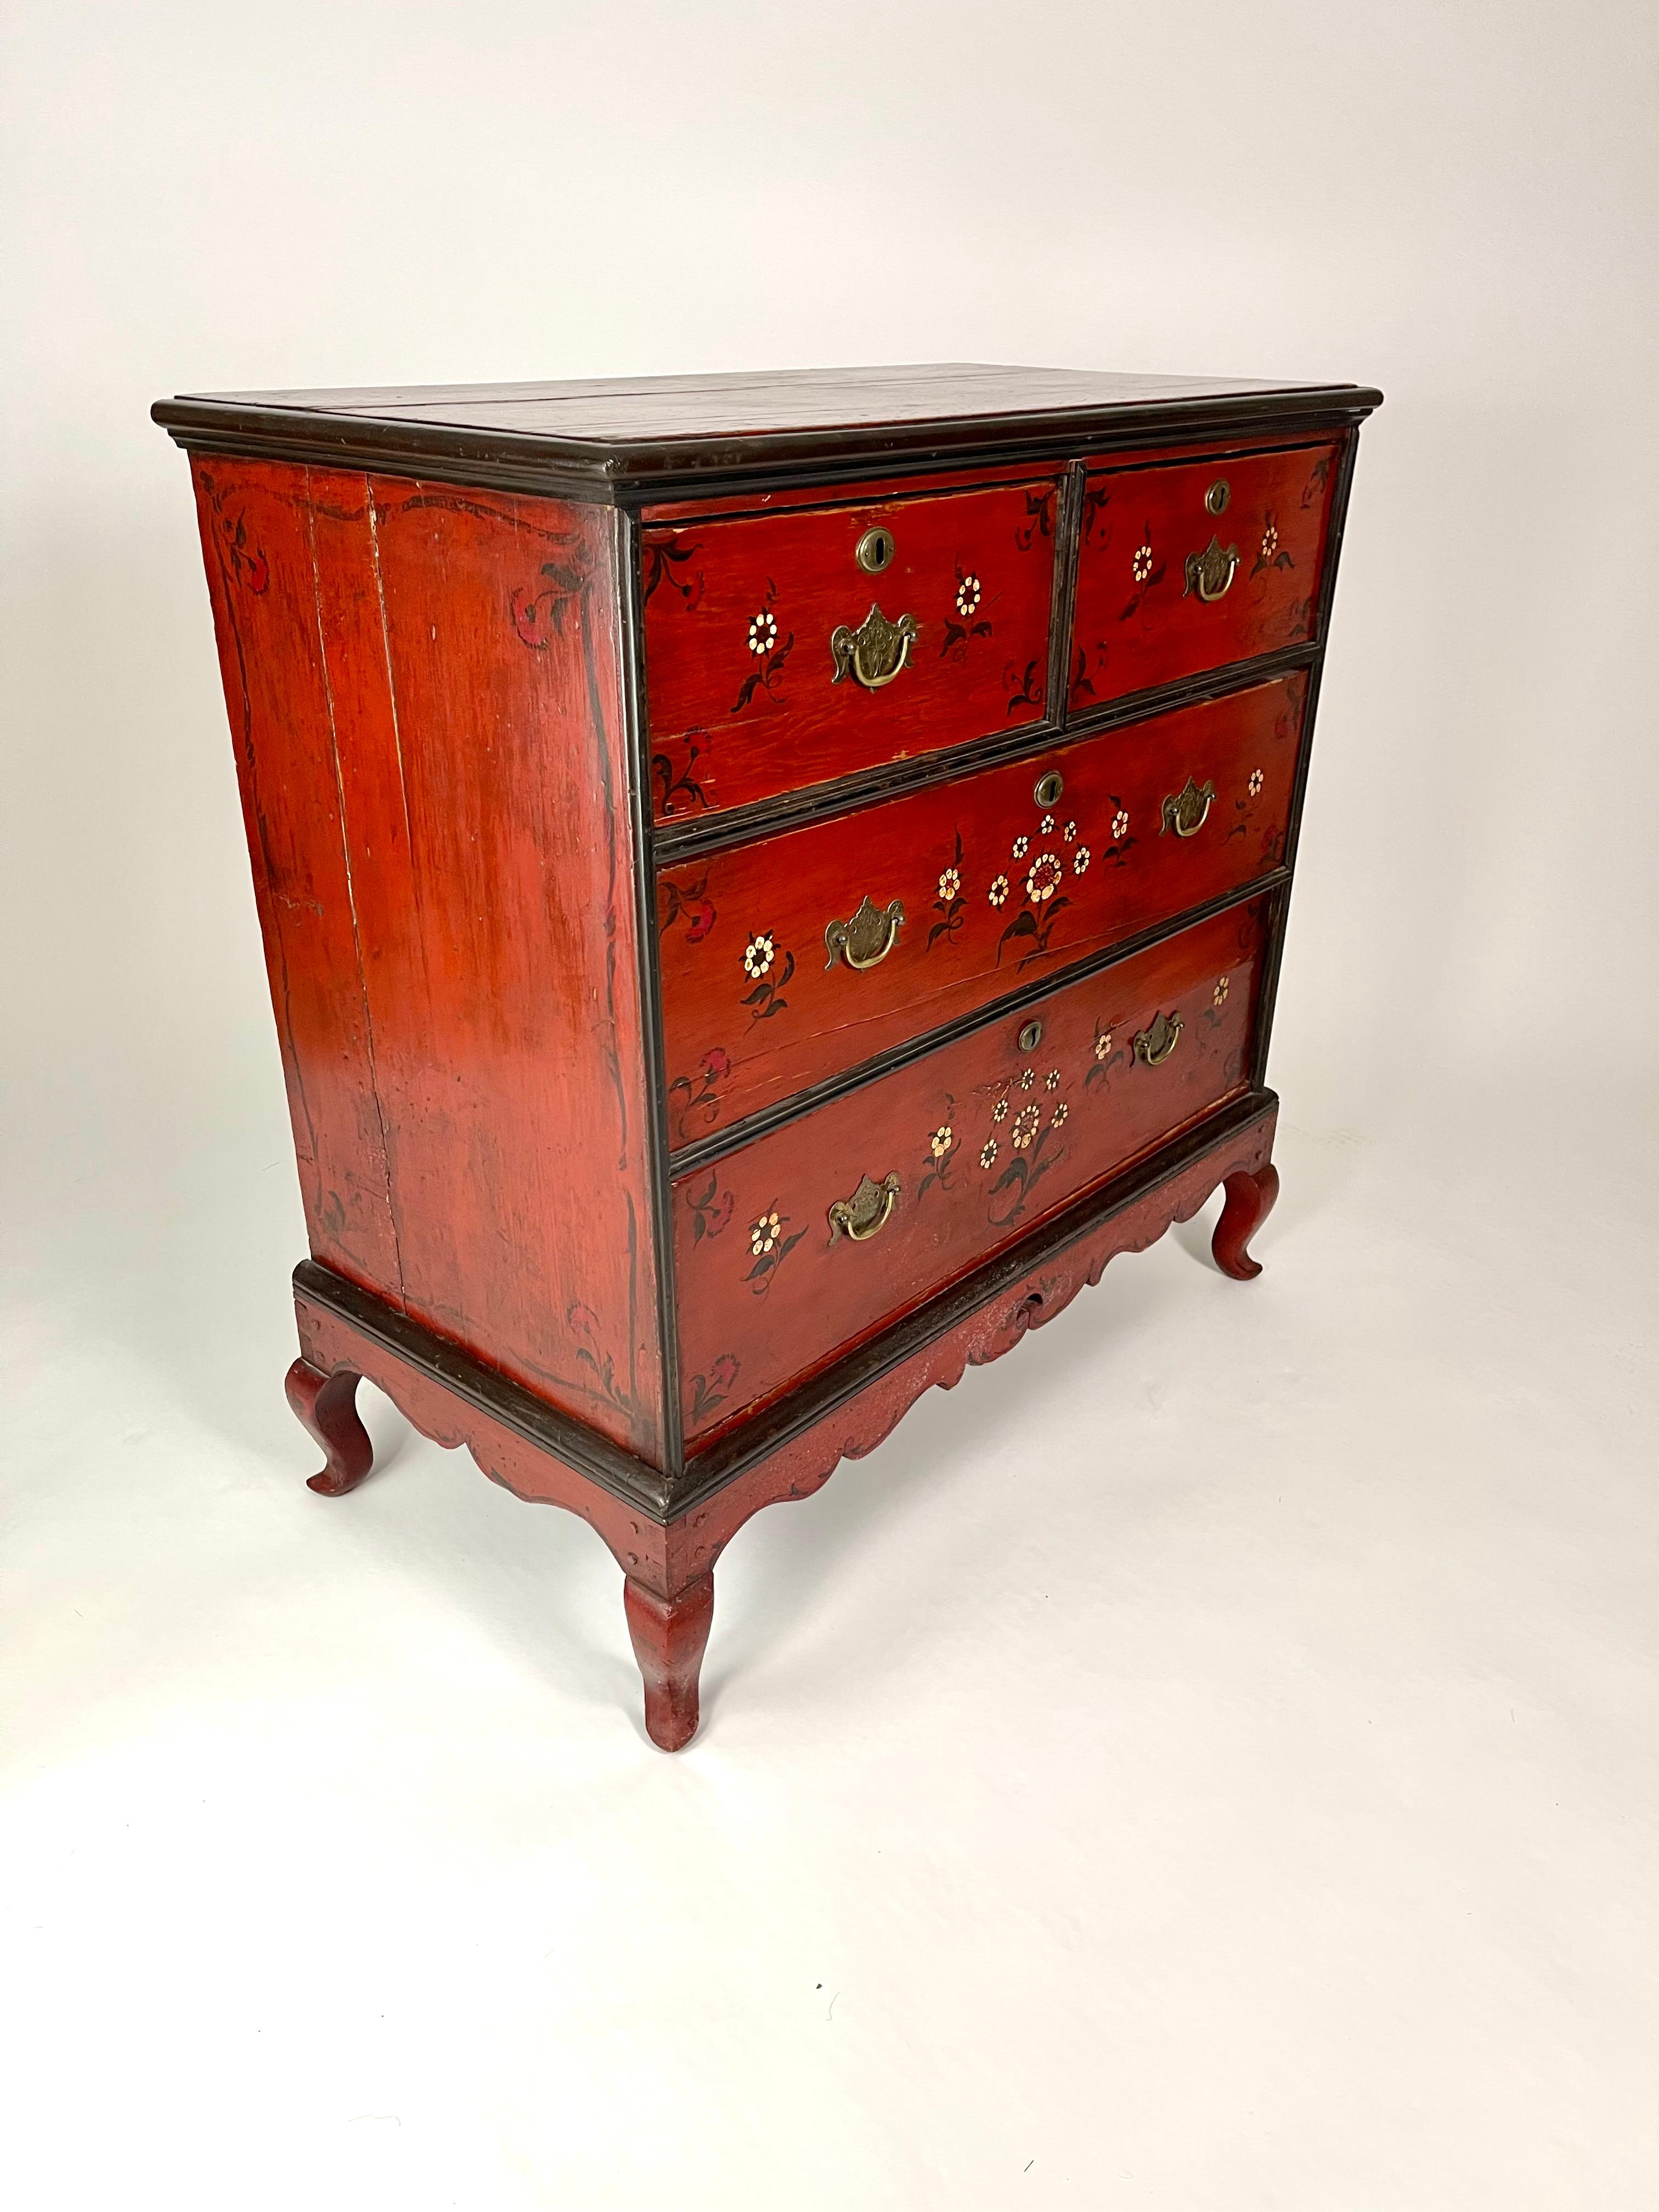 English Red, White Cream and Black Floral Painted Queen Anne Style Chest of Drawers